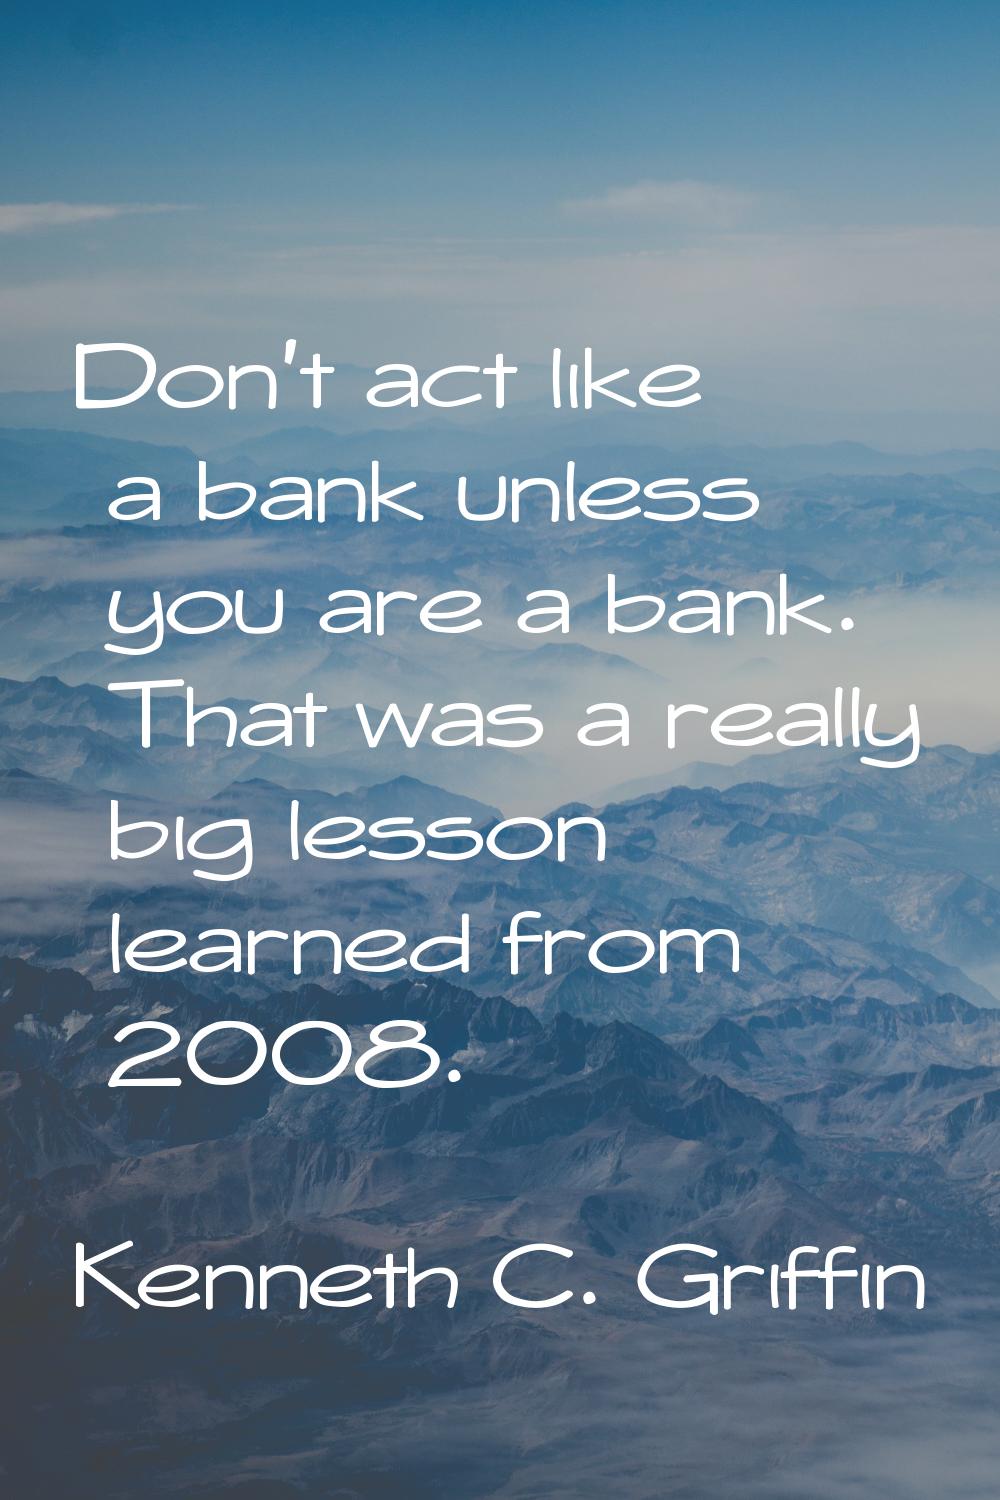 Don't act like a bank unless you are a bank. That was a really big lesson learned from 2008.